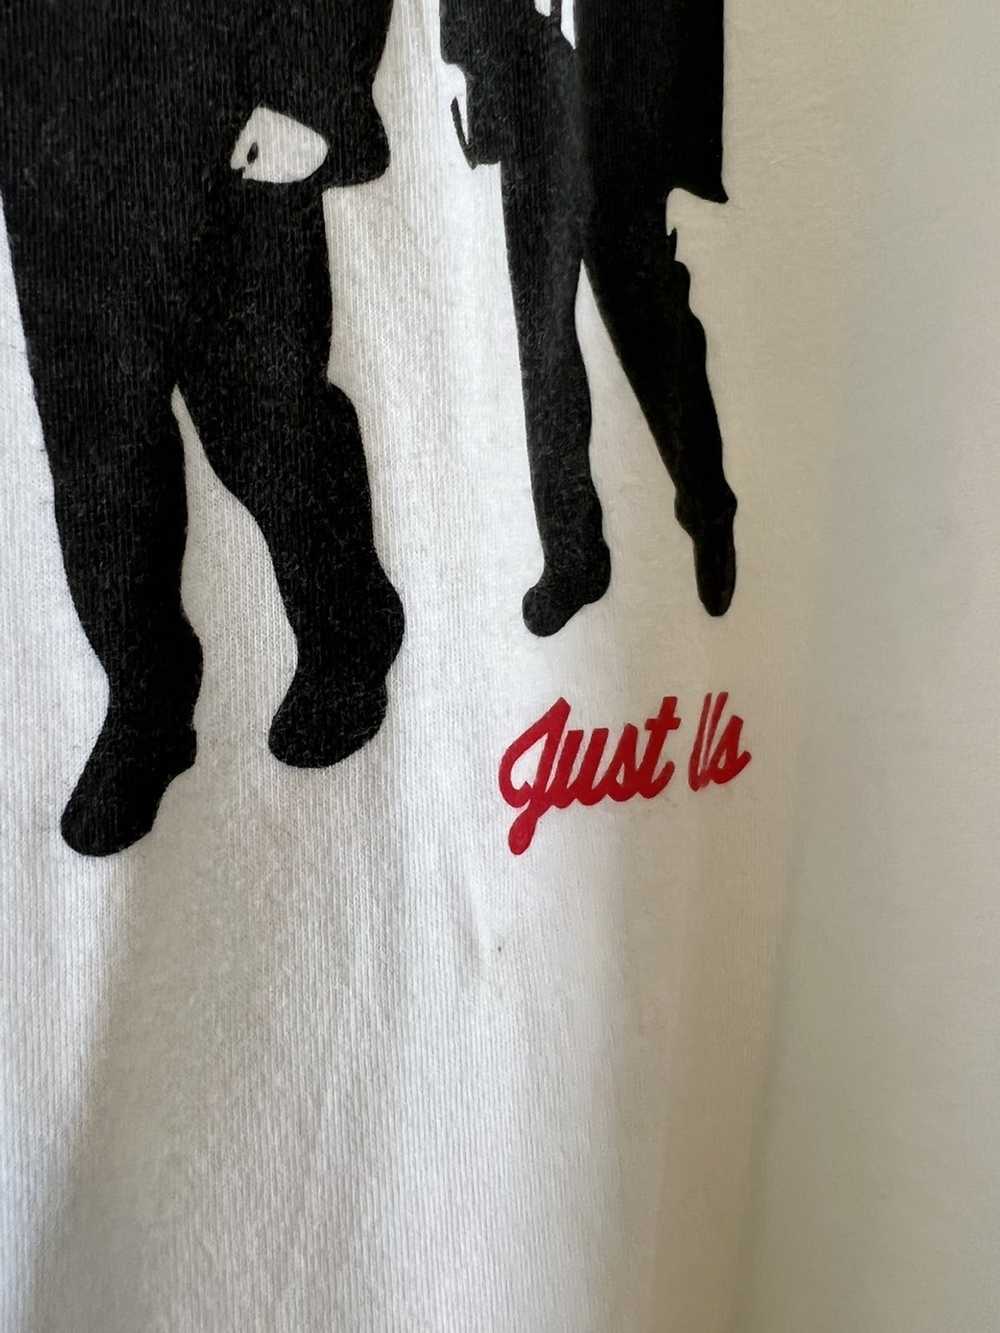 Kith Kith just us reservoir dogs t shirt size m - image 3